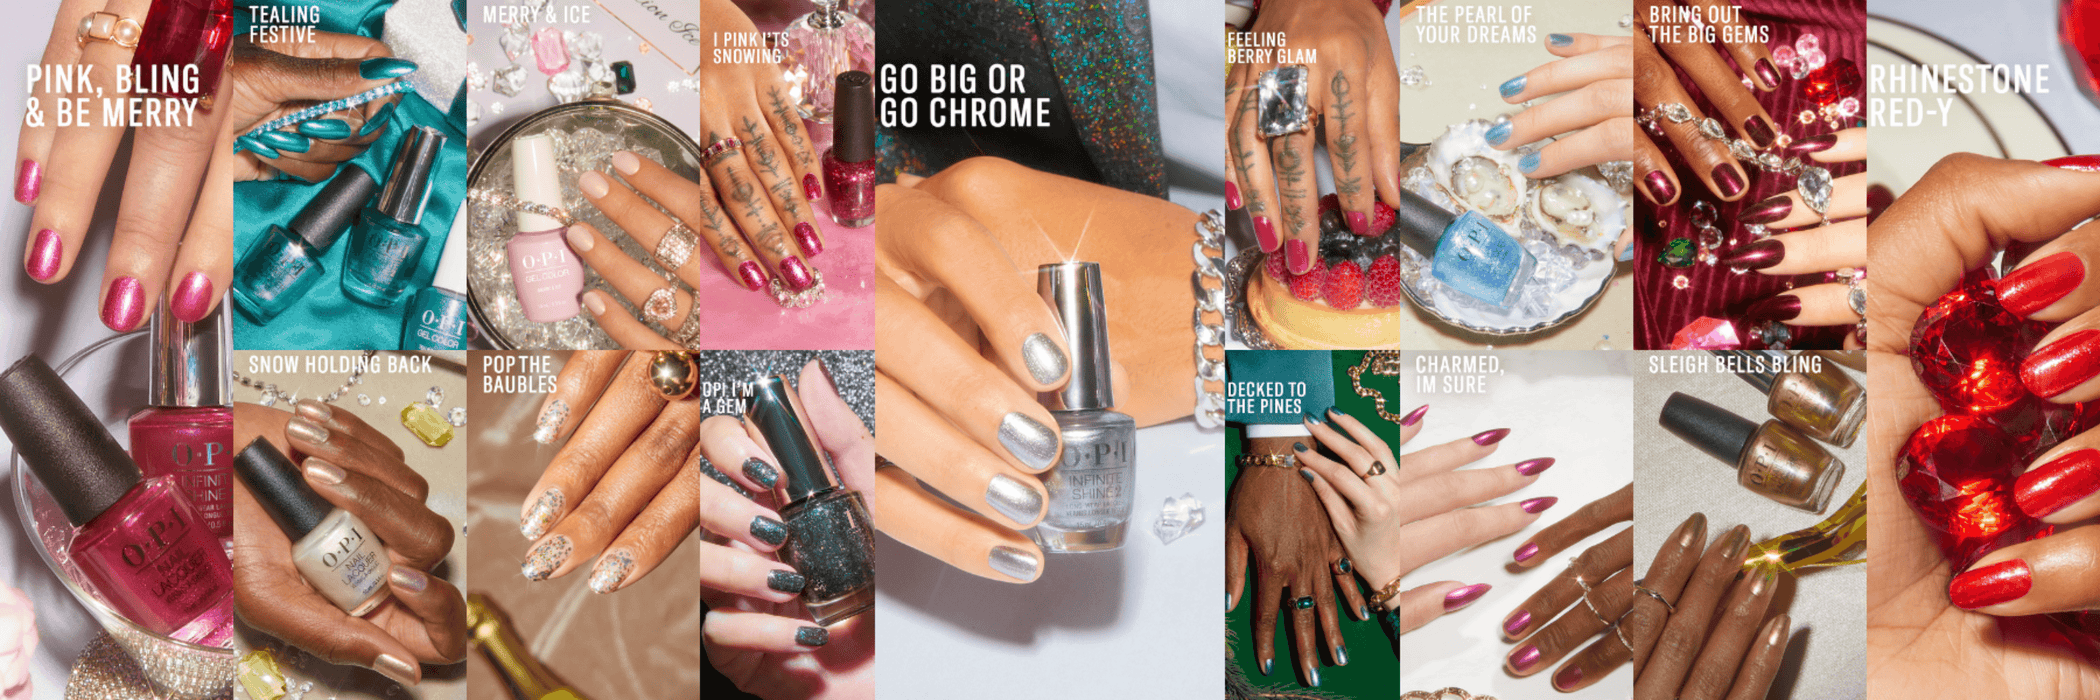 OPI Gel Colors - Jewel Be Bold Collection 15 Colors Only | Holiday 2022 - Angelina Nail Supply NYC